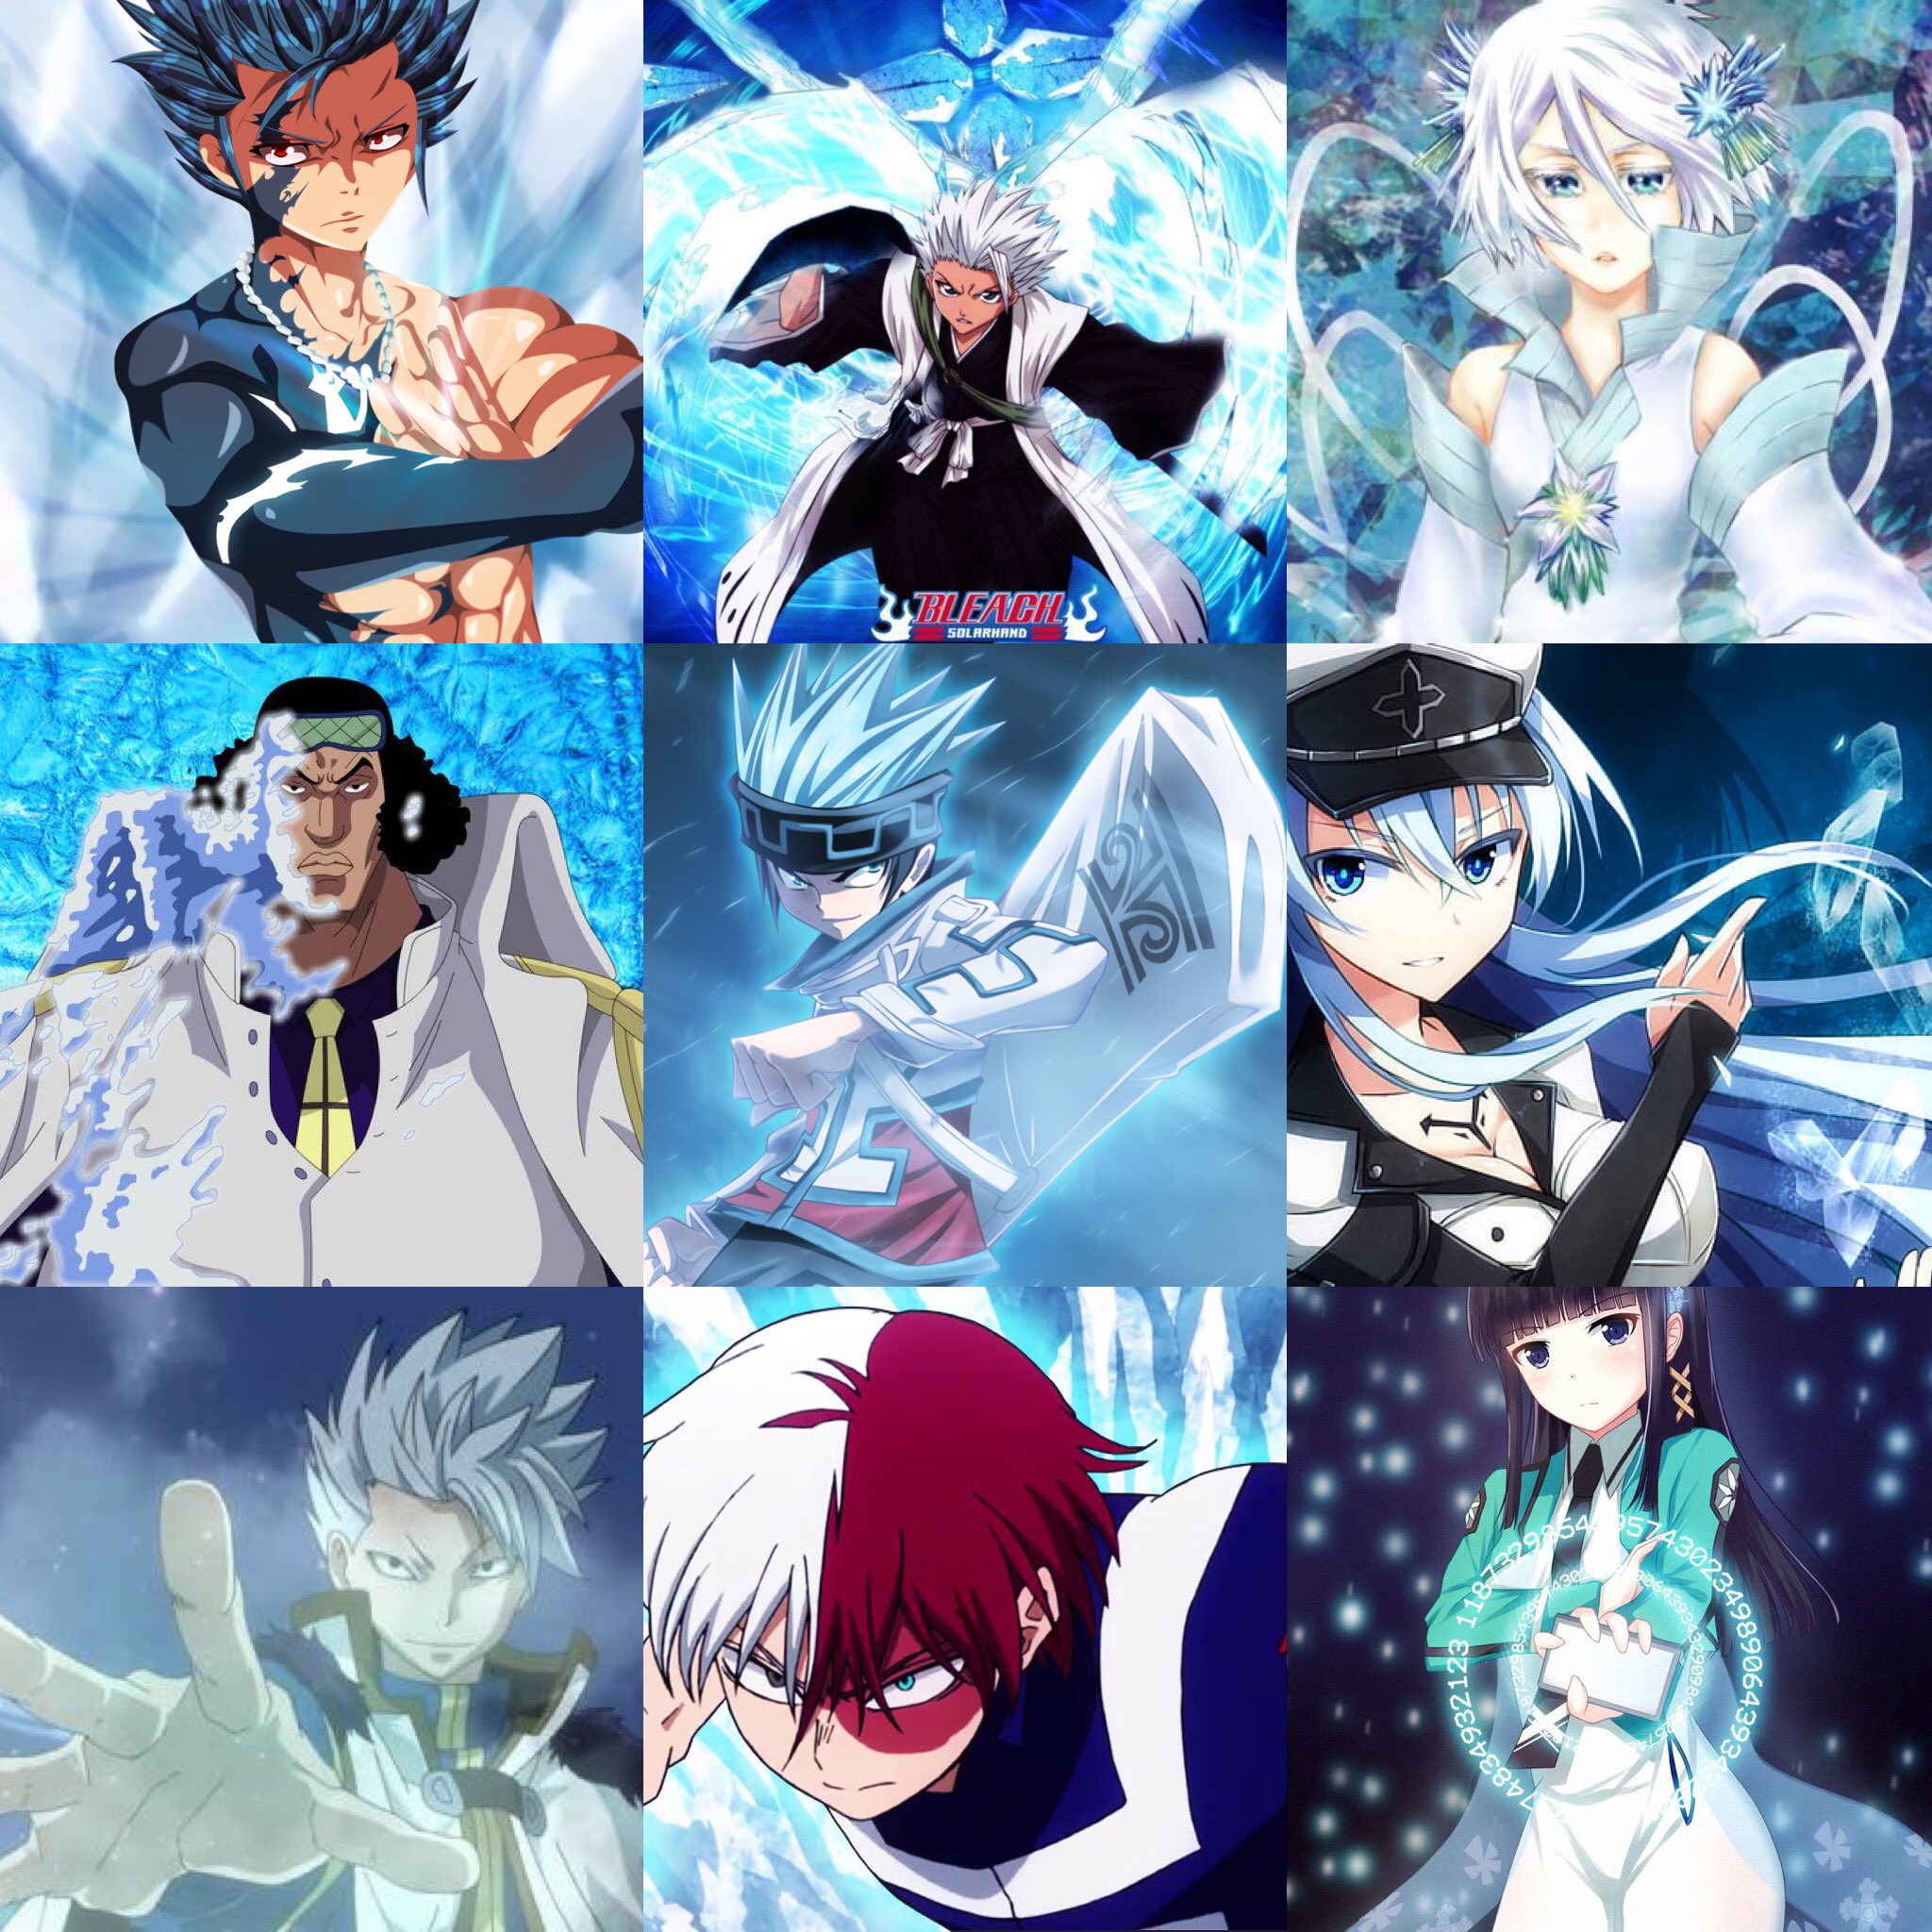 10 Strongest Anime Characters With Ice Powers, Ranked